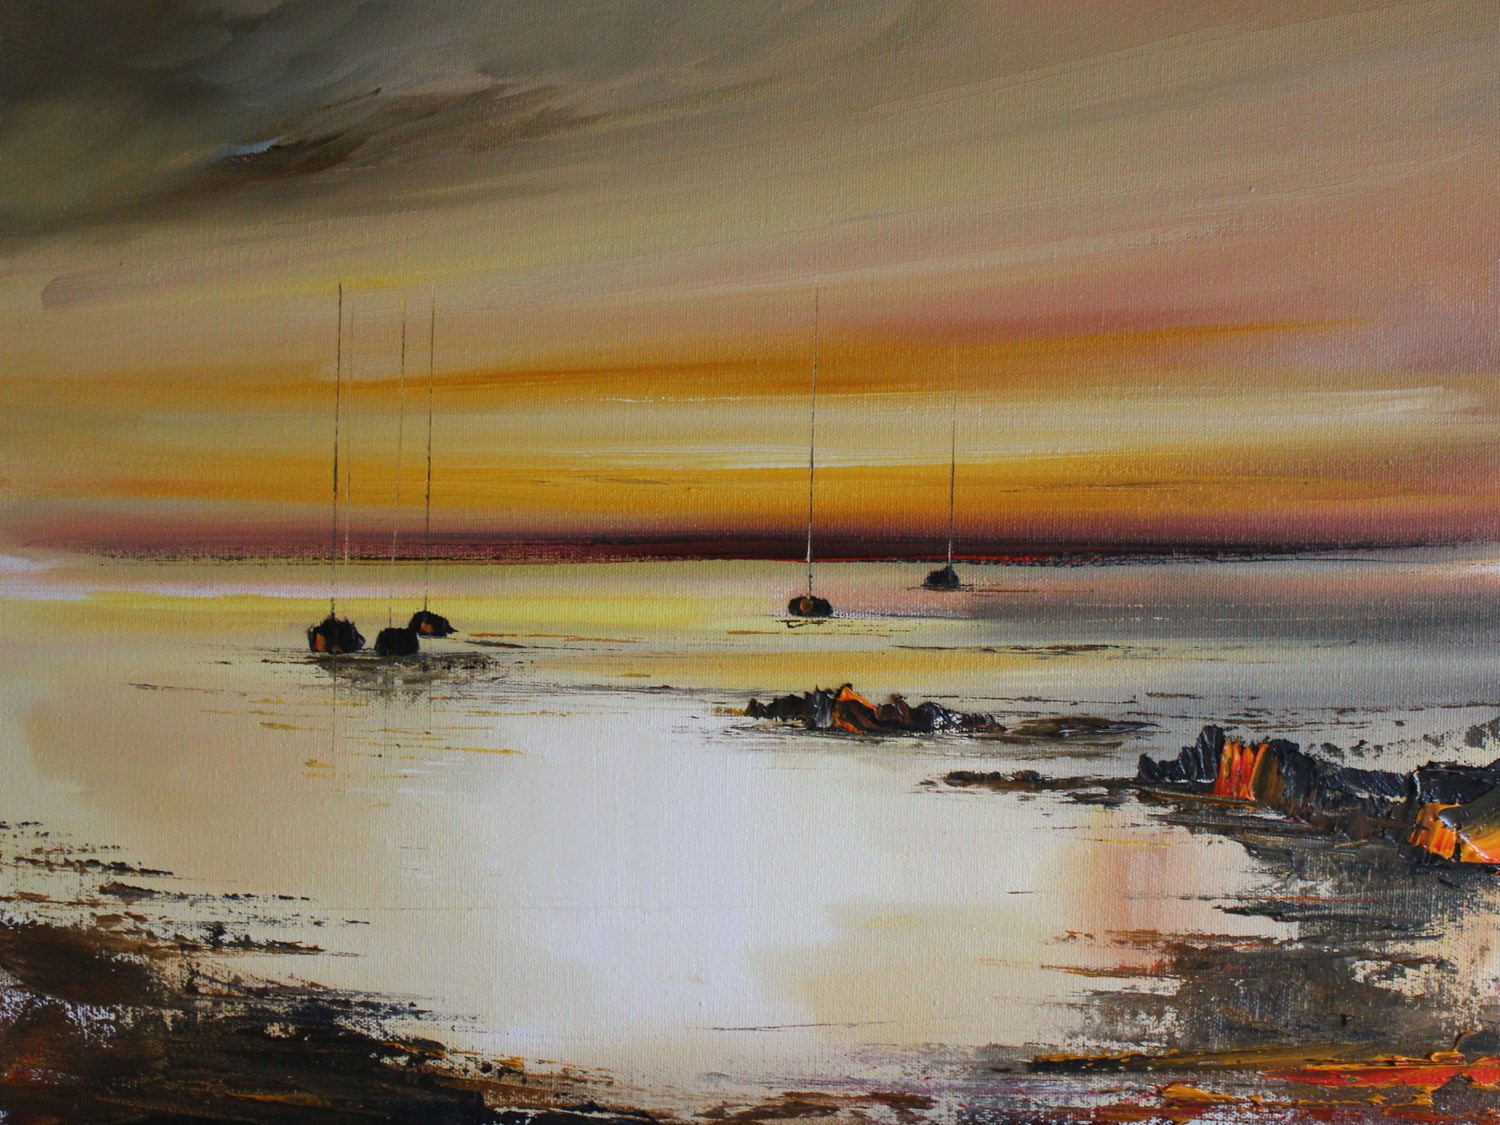 'At Twilight' by artist Rosanne Barr